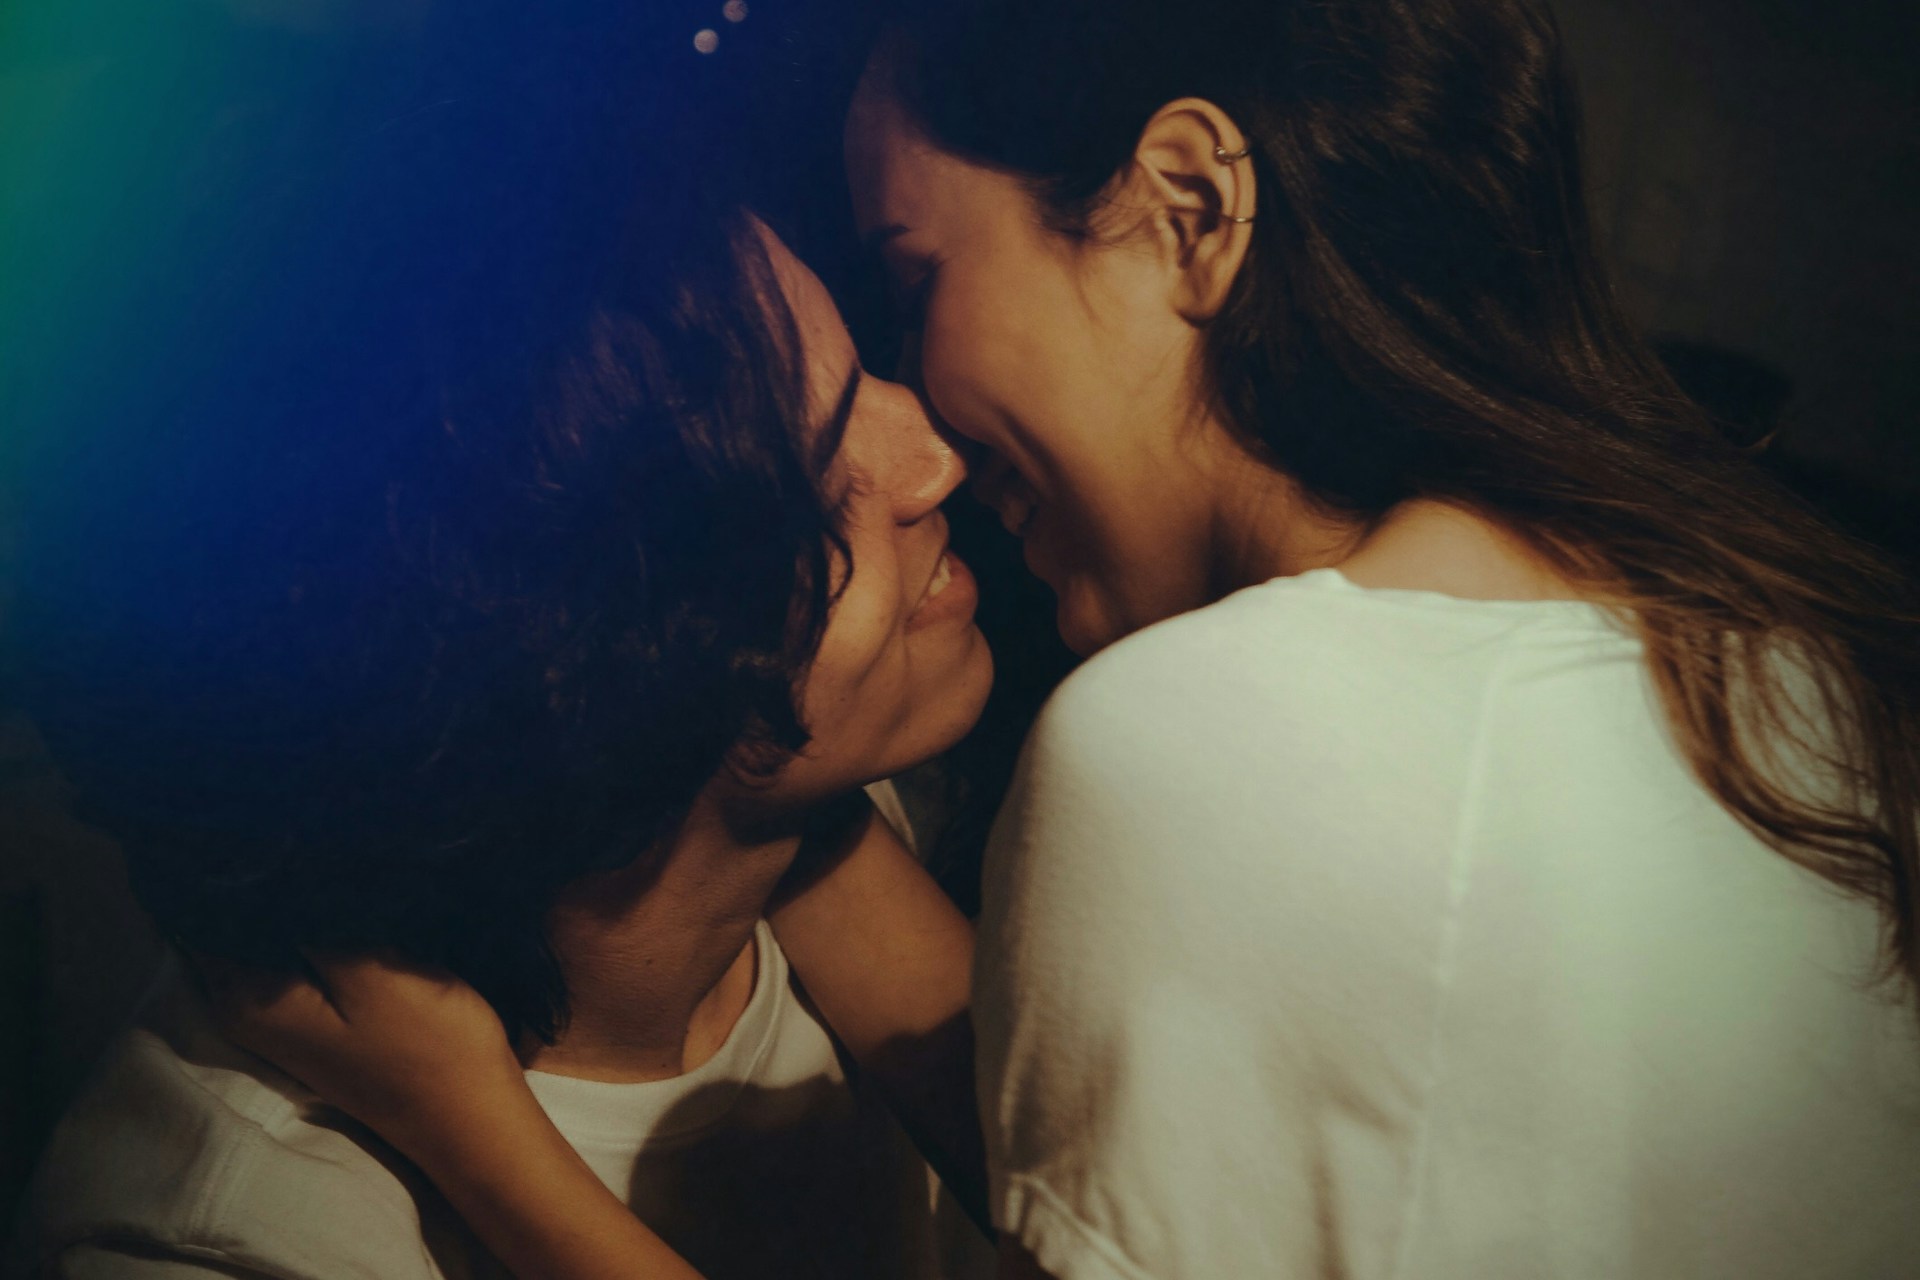 man and woman wearing white top kissing